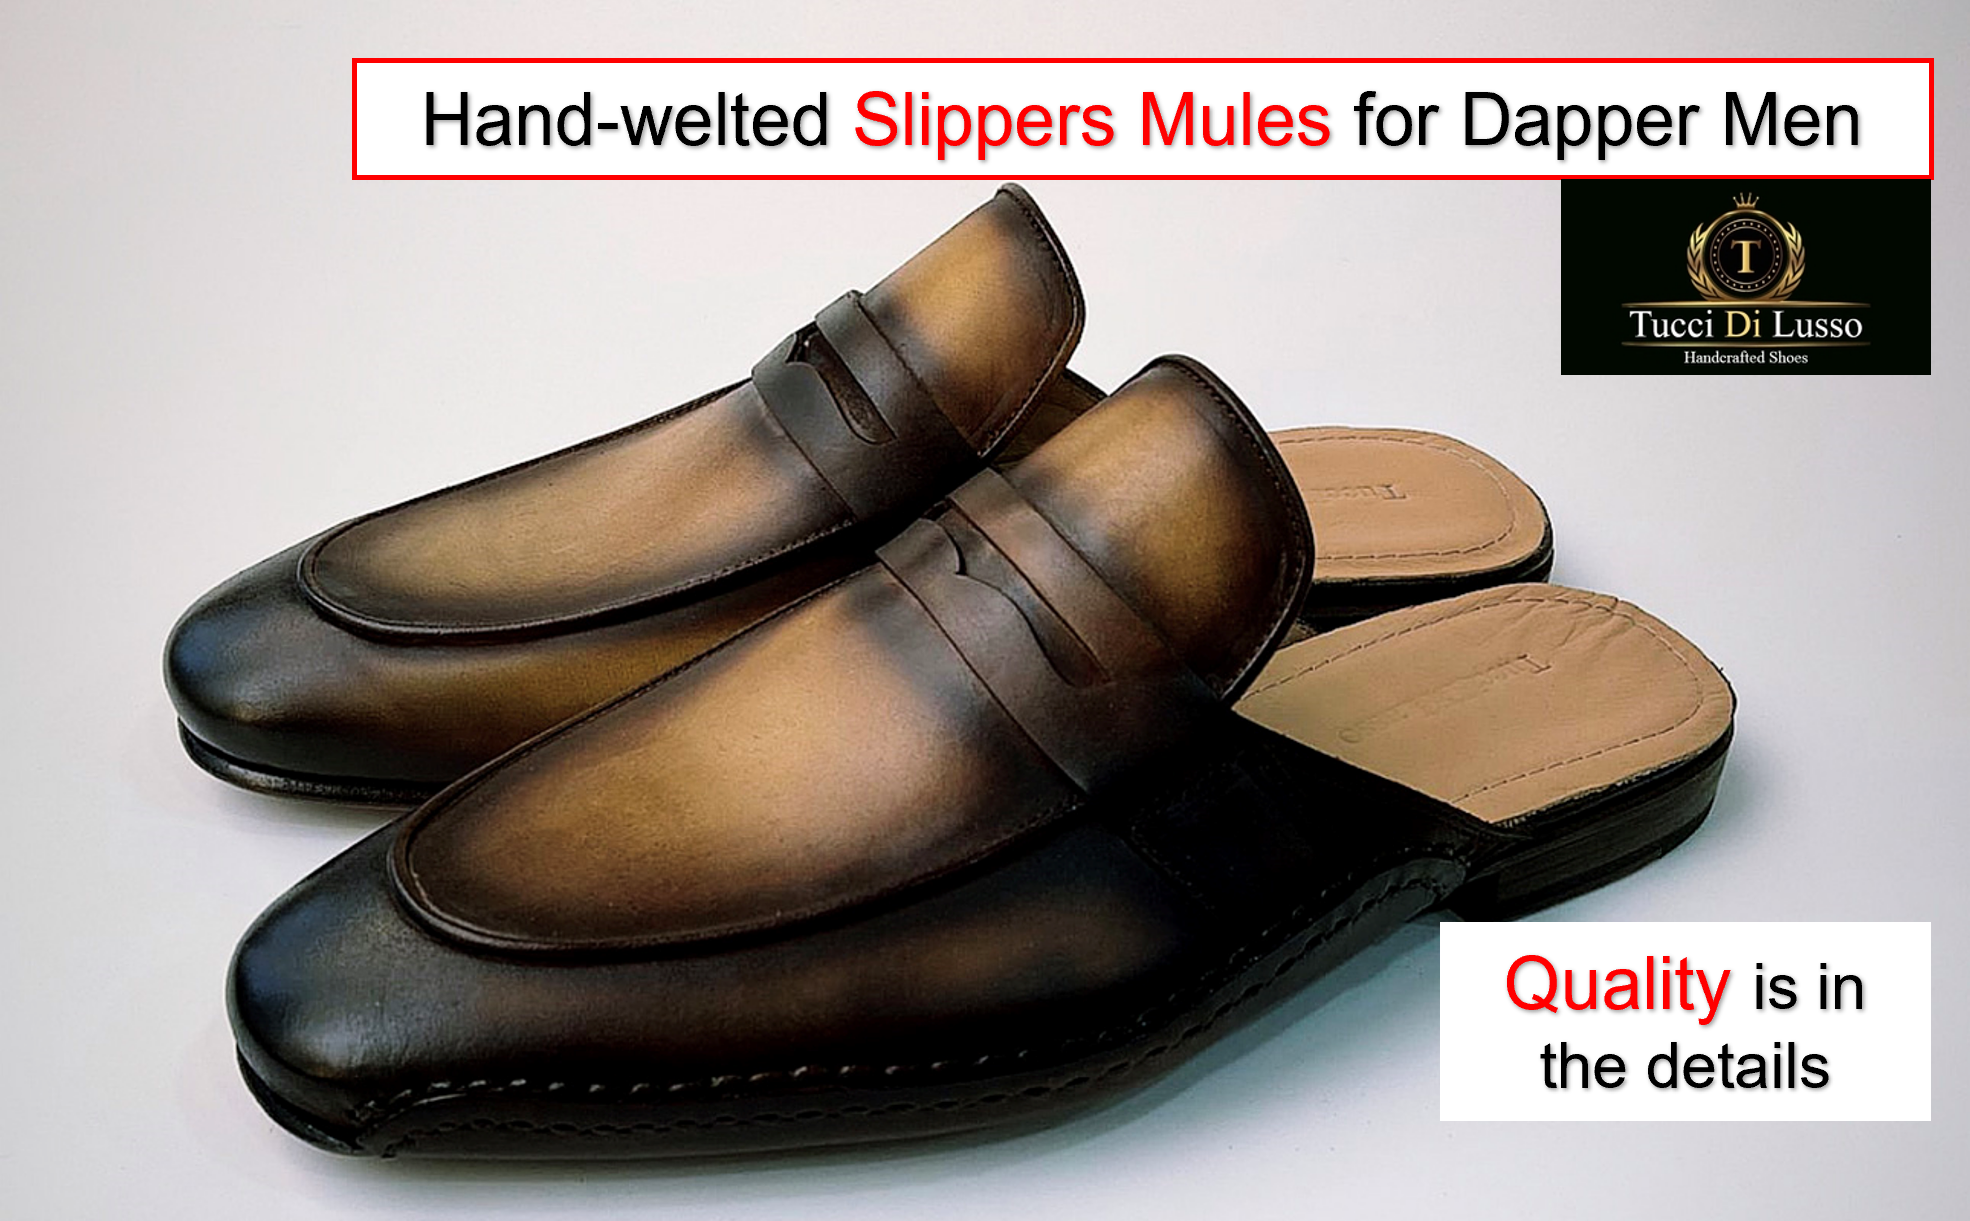 Hand-welted Slippers Mules for Dapper Men

@),

Tucci Di Lusso
Handcrafied Shoes

   
  
 

a
= >
=
5 ‘

Quality is in
the details